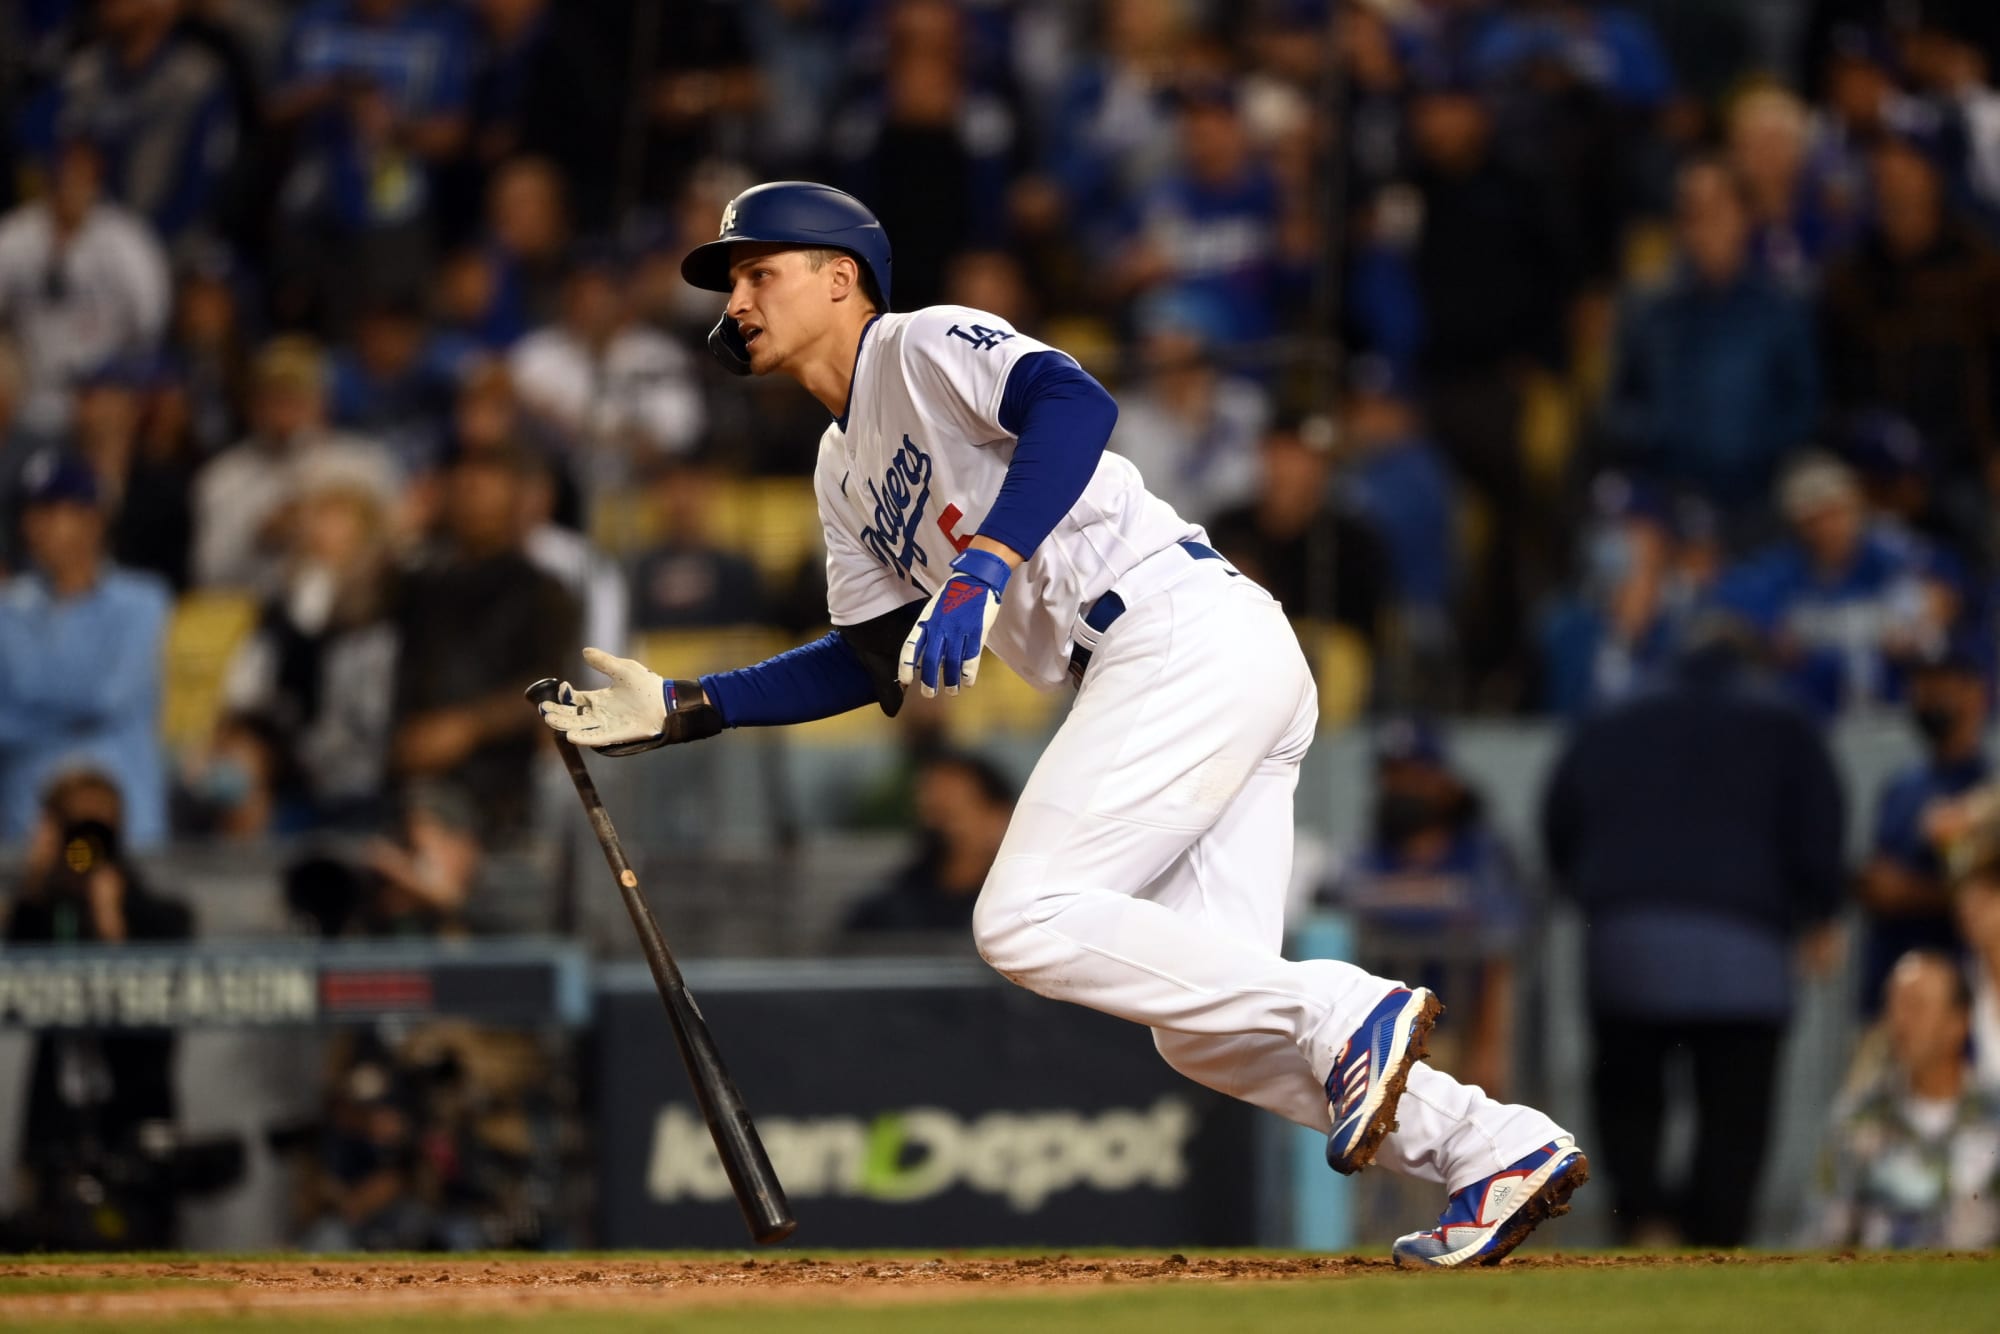 New York Yankees may be targeting Corey Seager in free agency